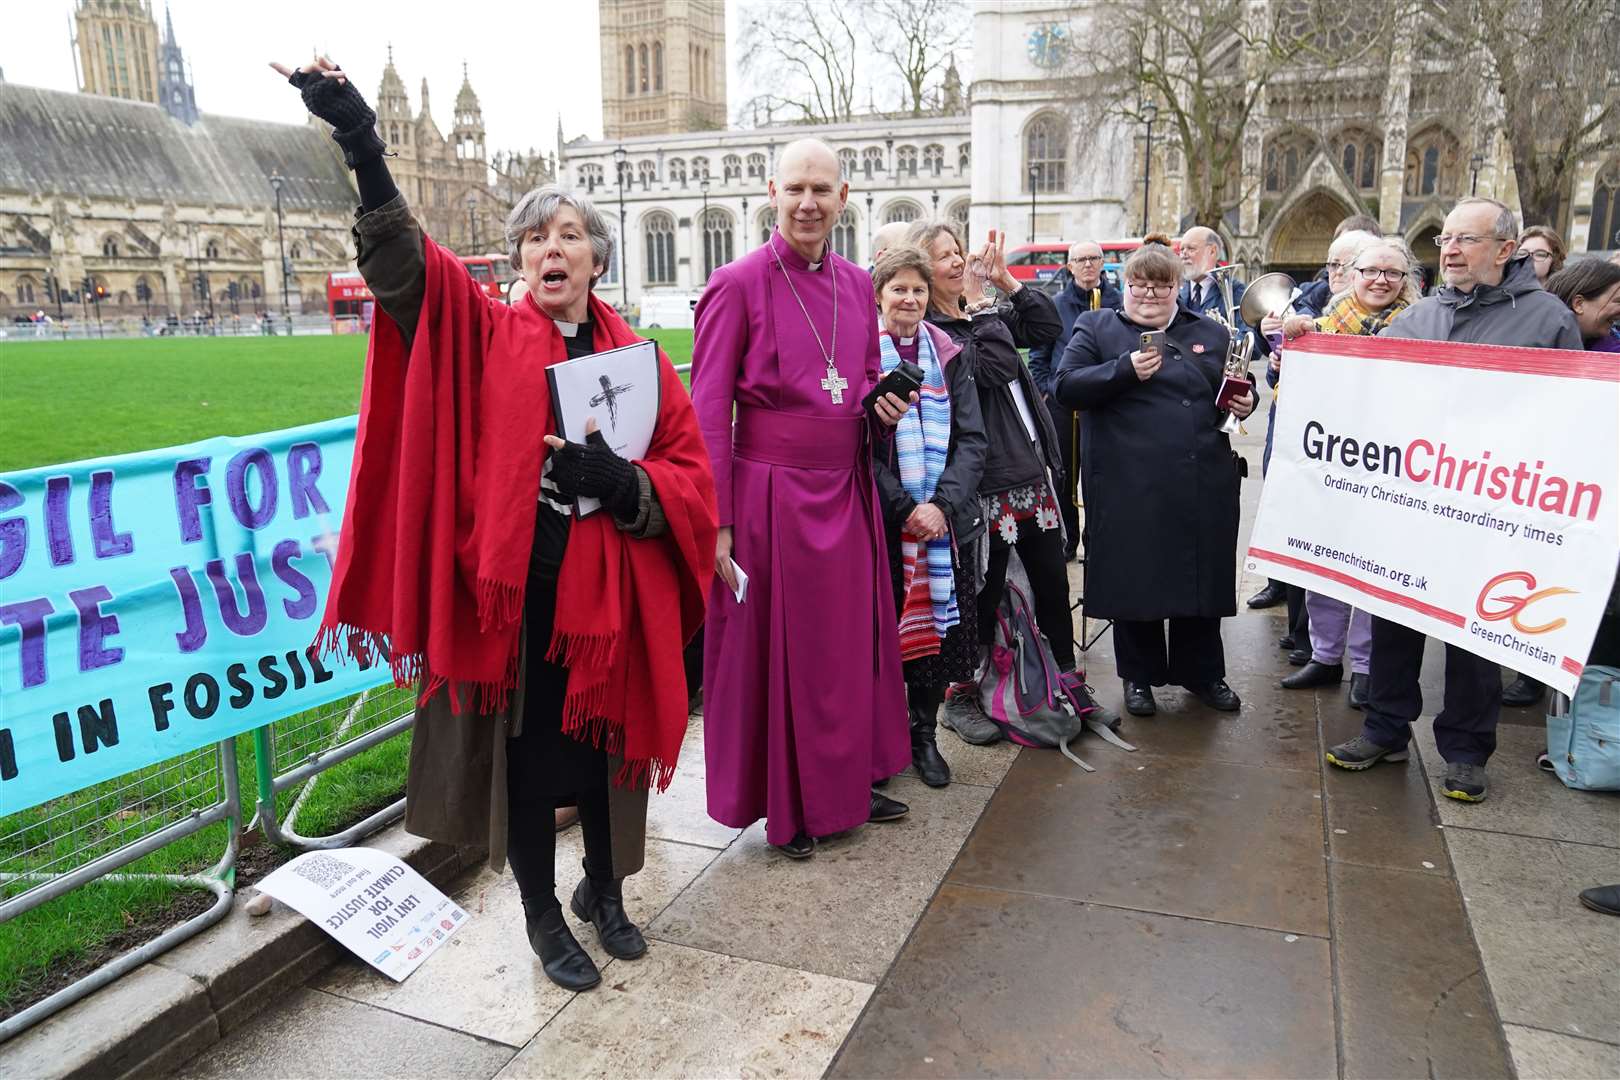 Christian protesters in Parliament Square (Stefan Rousseau/PA)